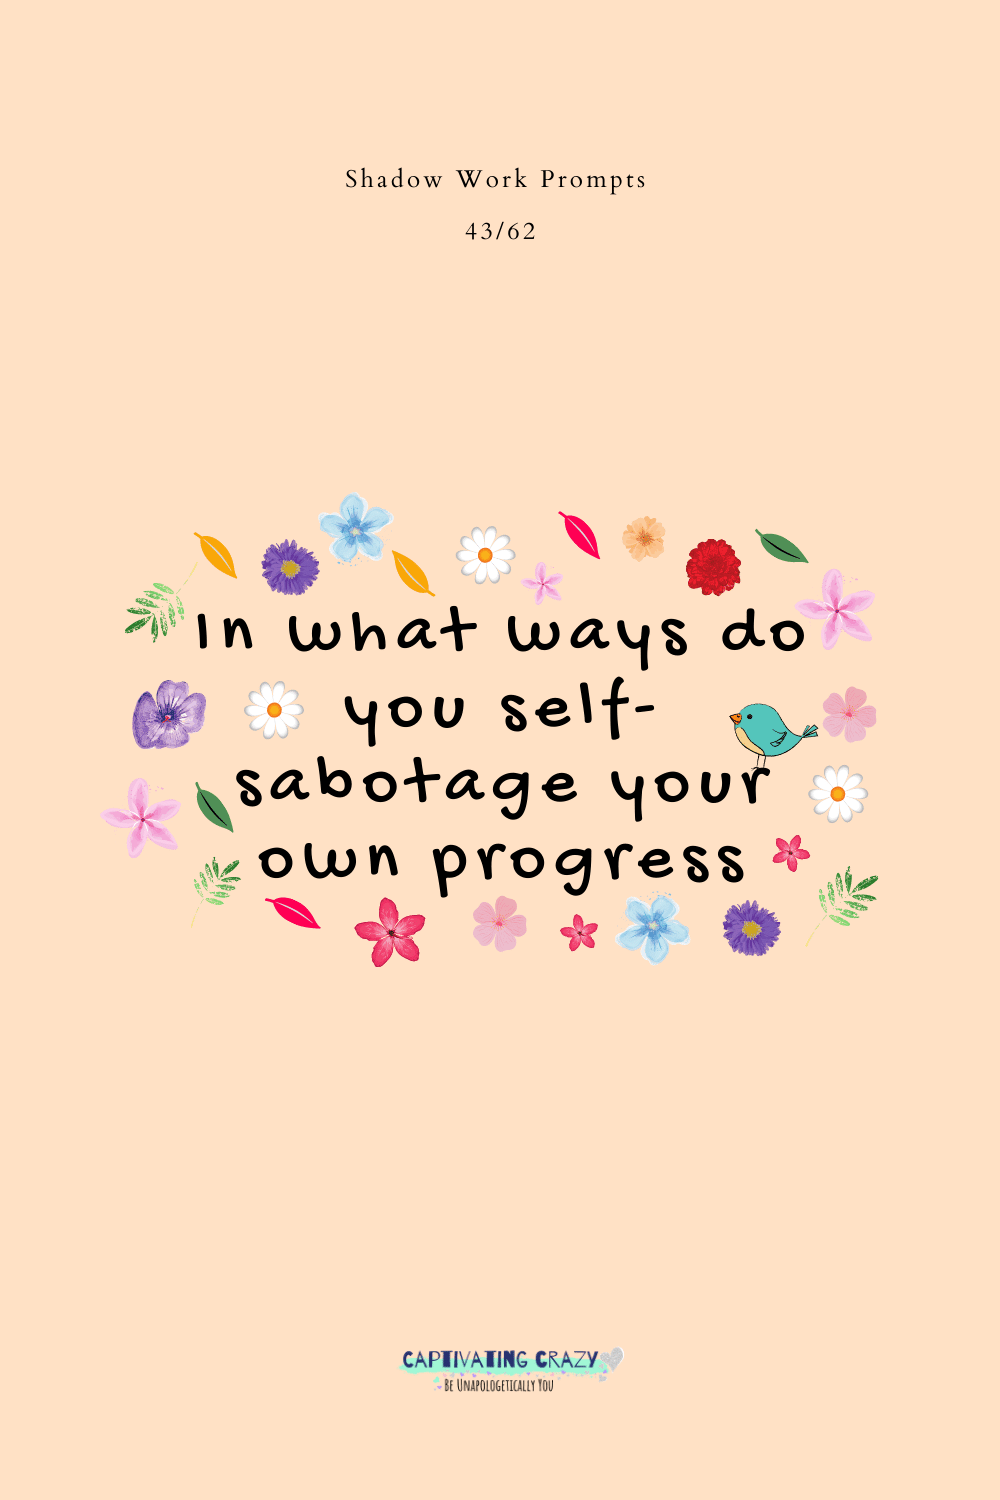 In what ways do you self-sabotage your own progress